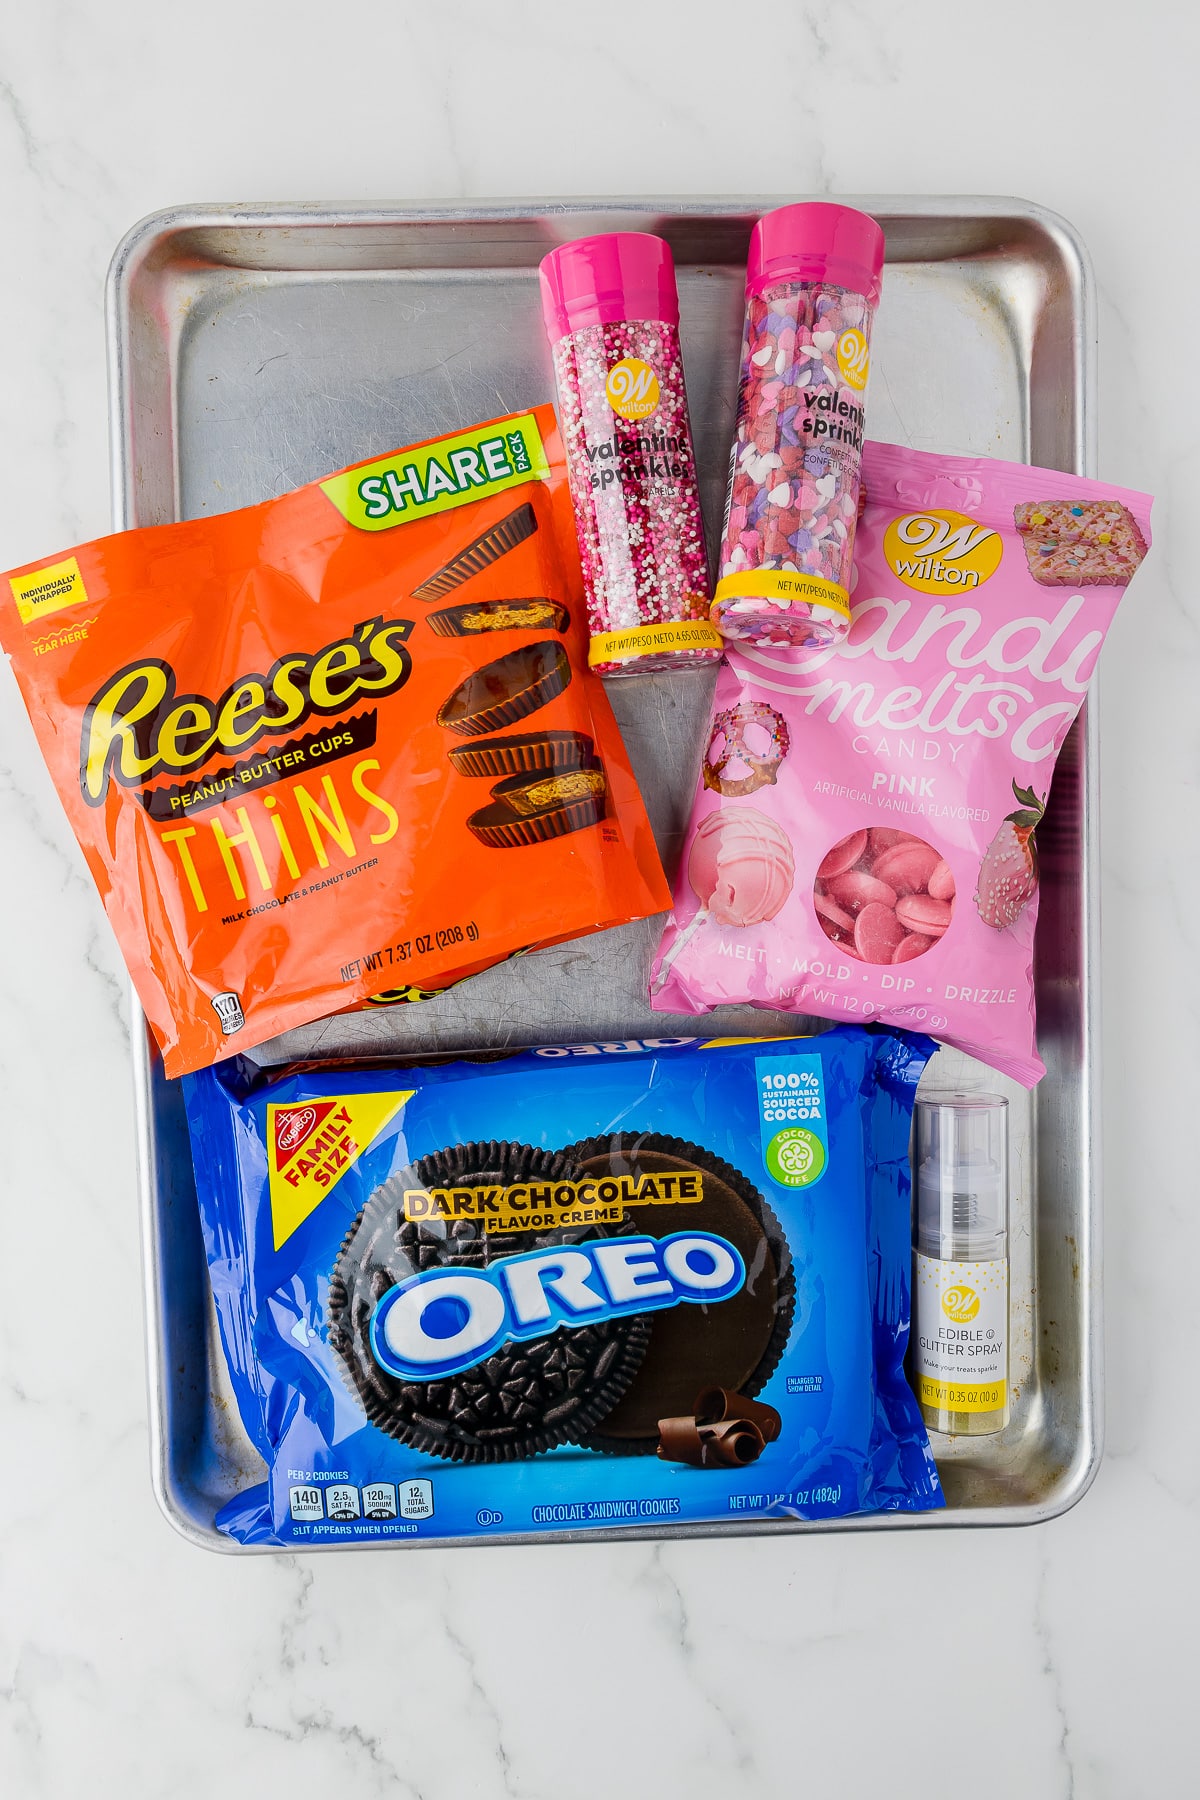 a package of Reese's peanut butter things, wilton sprinkles, wilton pink candy melts, dark chocolate flavor creme oreos, and edible glitter spray on a cookie sheet